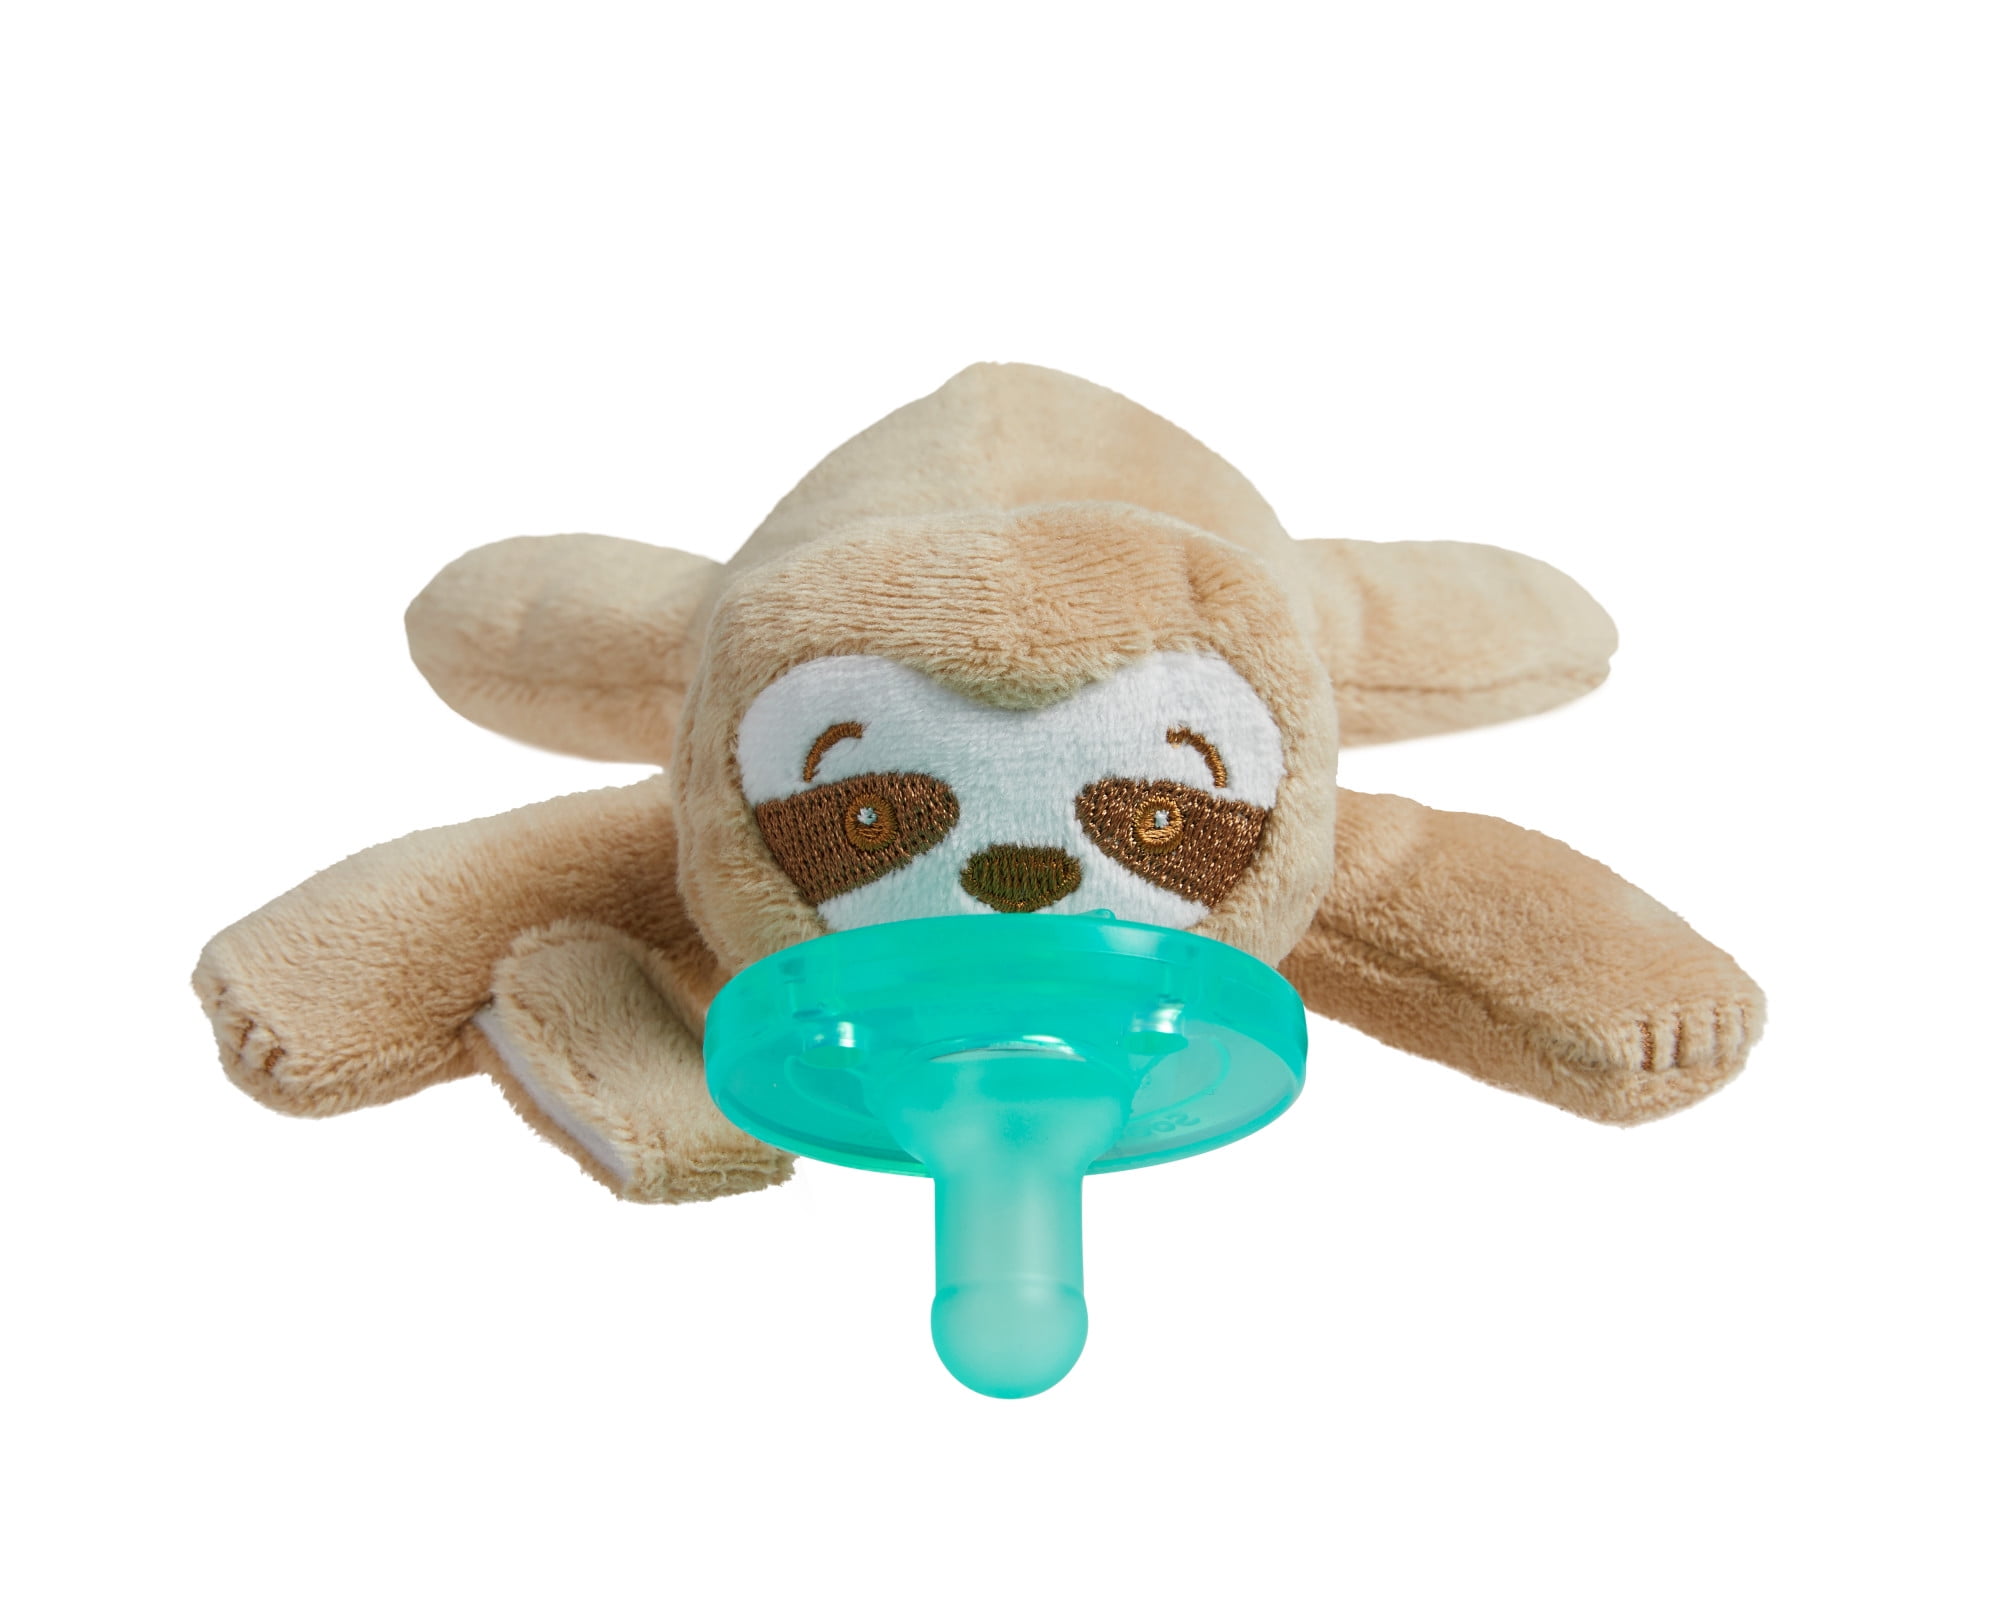 Philips Avent Soothie Snuggle Pacifier Holder with Detachable Pacifier,  Sloth, 0M+, SCF347/07 